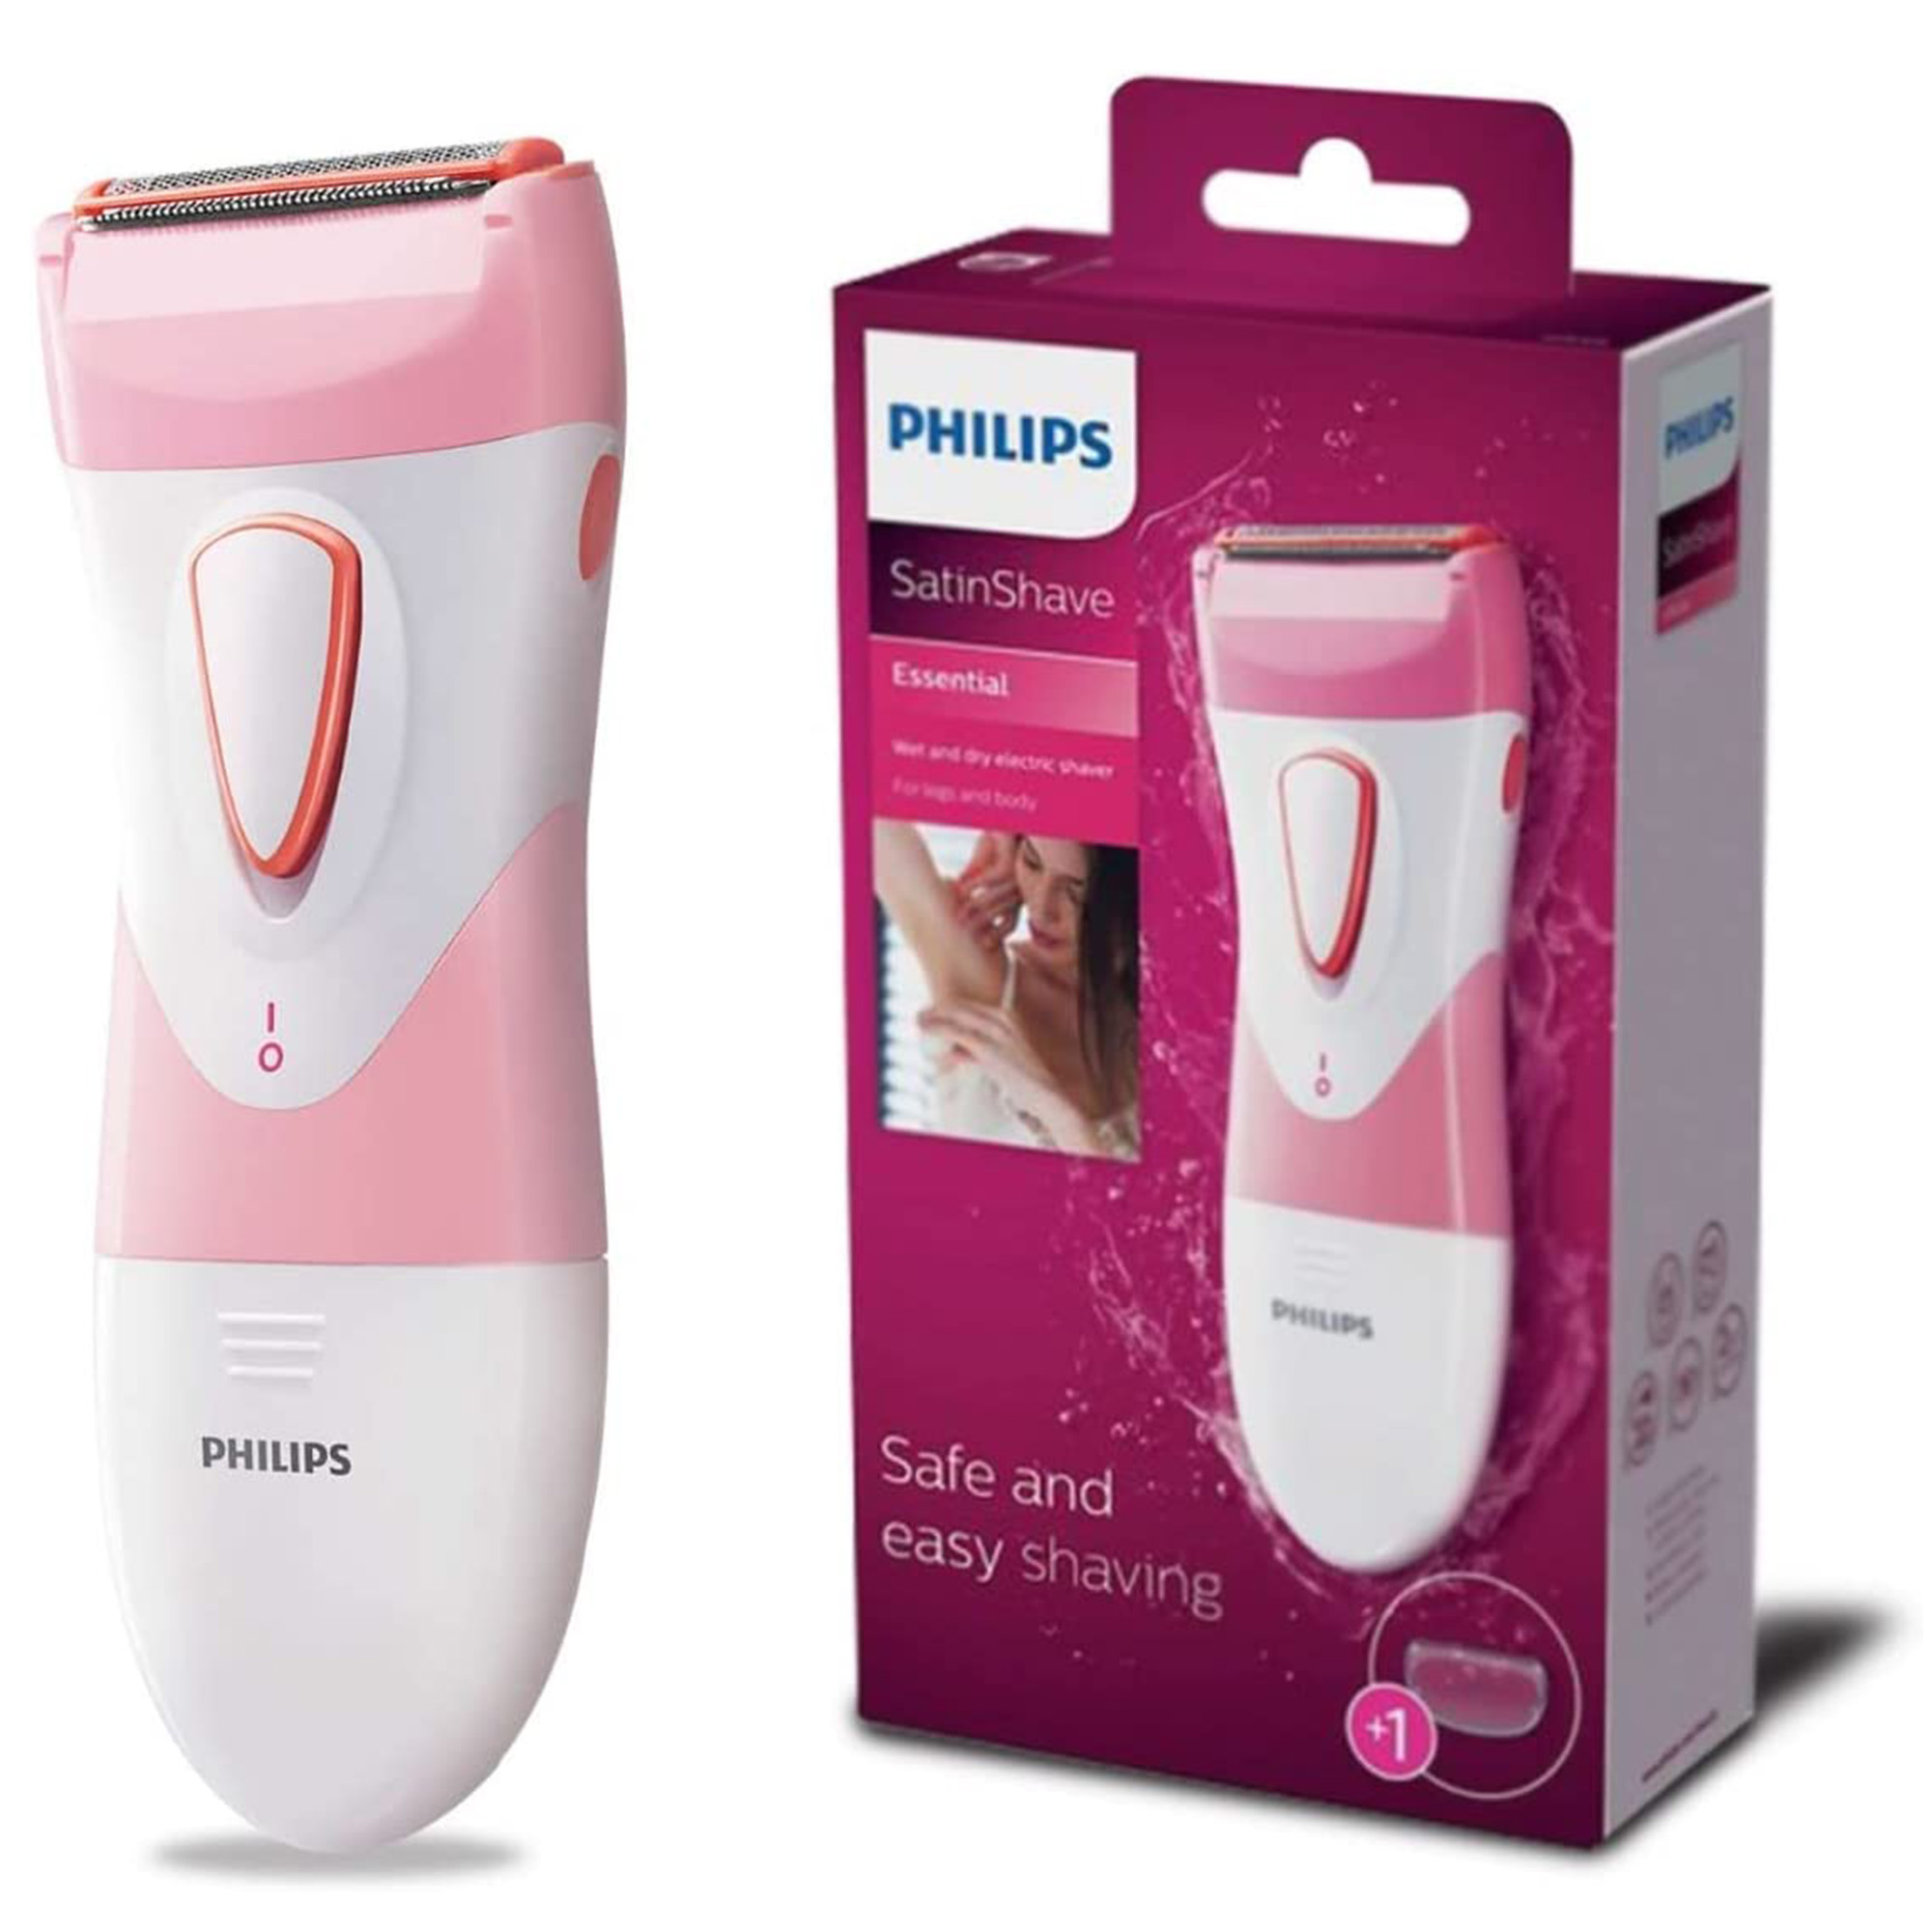 Philips SatinShave Cordless Electric Razor for Women Wet & Dry Use Lady Shaver - image 1 of 6